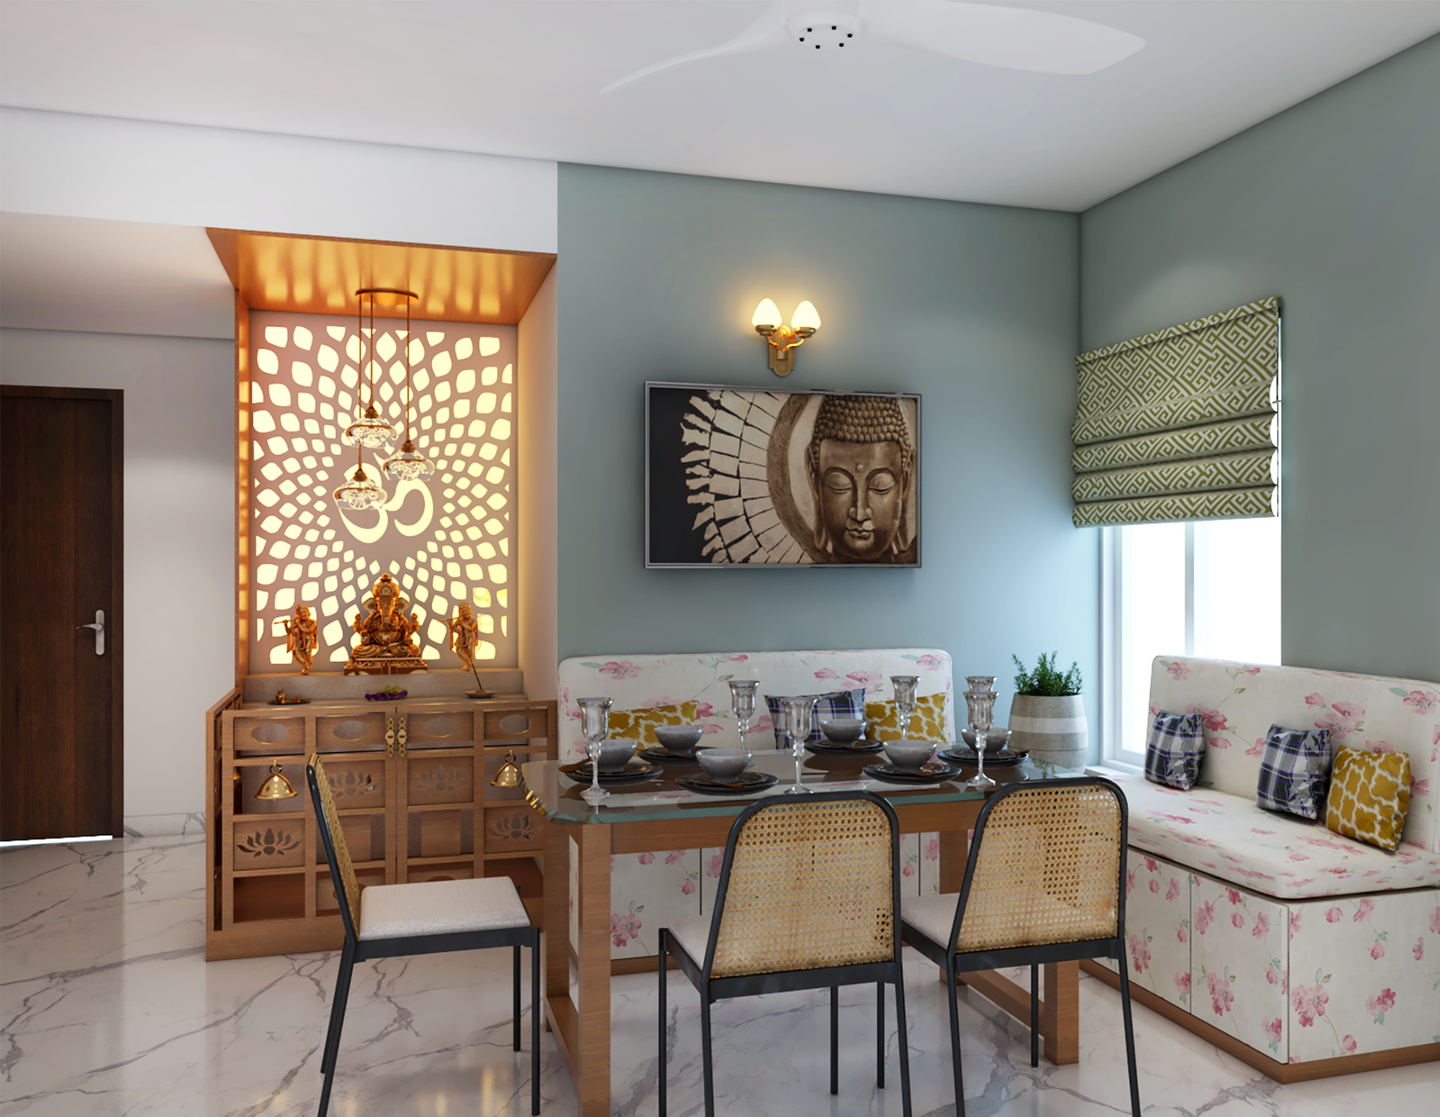 Traditional Dining Room With A Built-In Pooja Room - Livspace